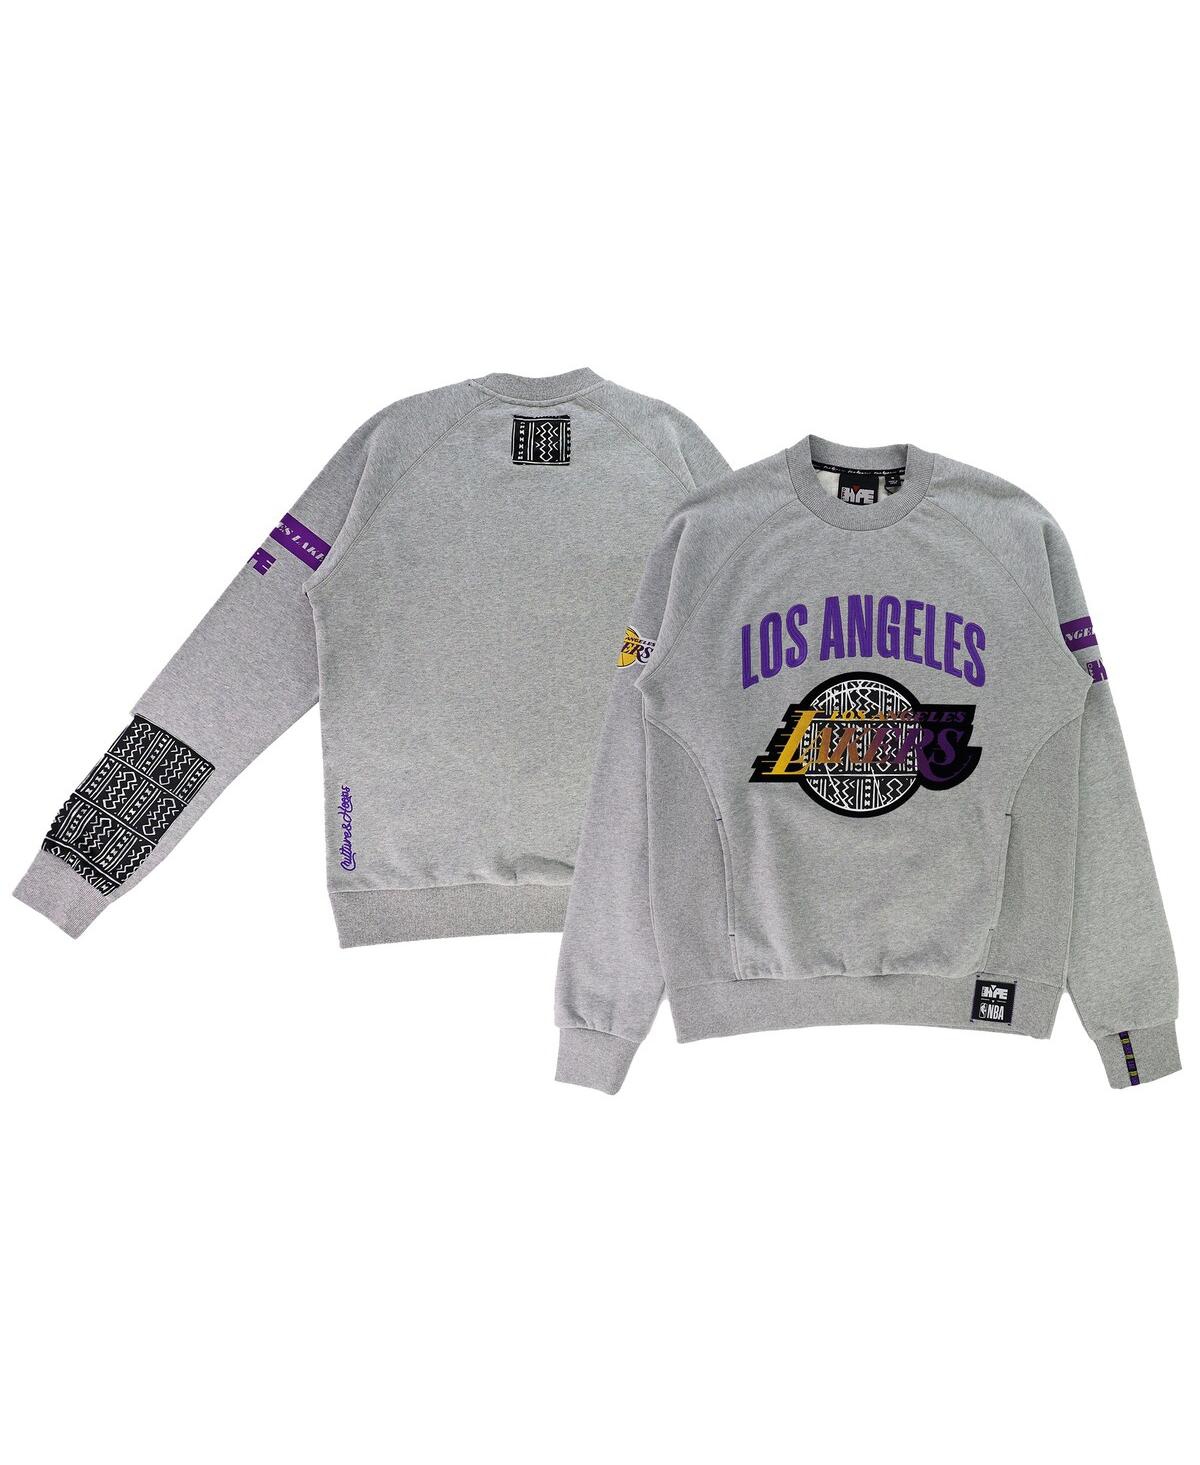 Two Hype Unisex Nba X   Heather Gray Los Angeles Lakers Culture & Hoops Heavyweight Pullover Sweatshi